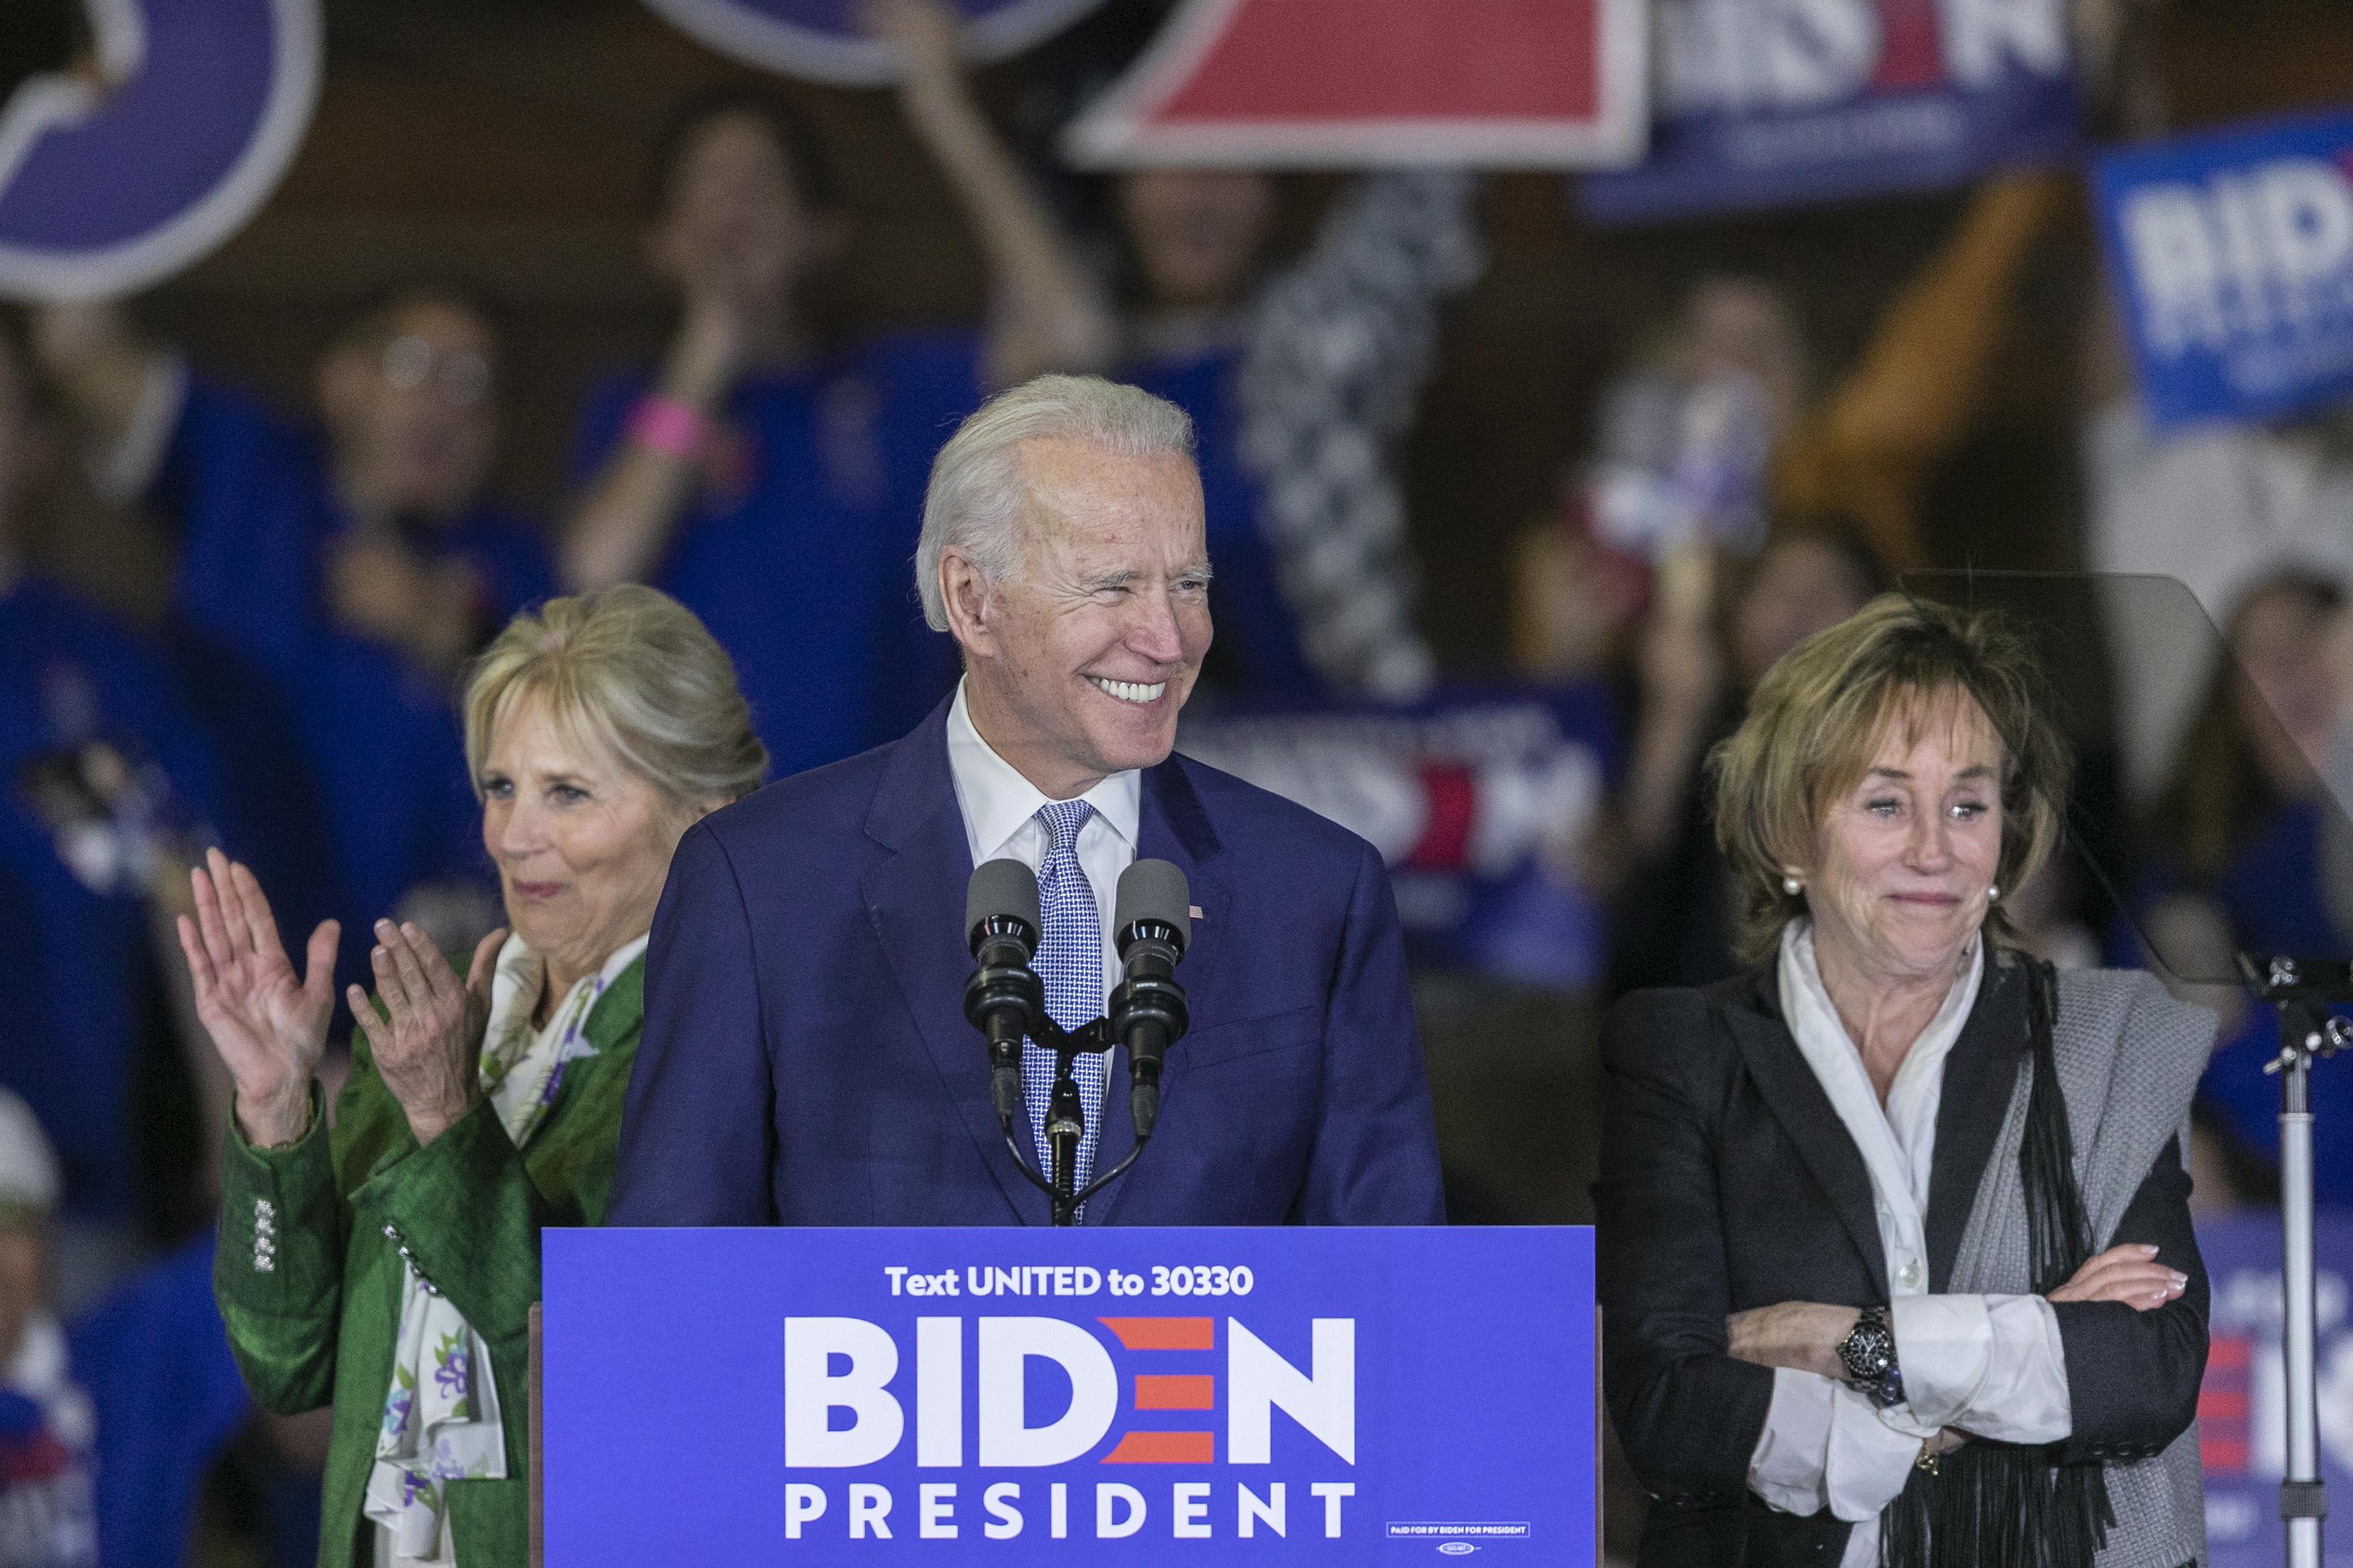 Joe Biden is smiling at a rally behind a podium that says BIDEN PRESIDENT, standing next to his wife Jill Biden and sister Valerie Biden Owens. People with Biden signs cheer in the background.